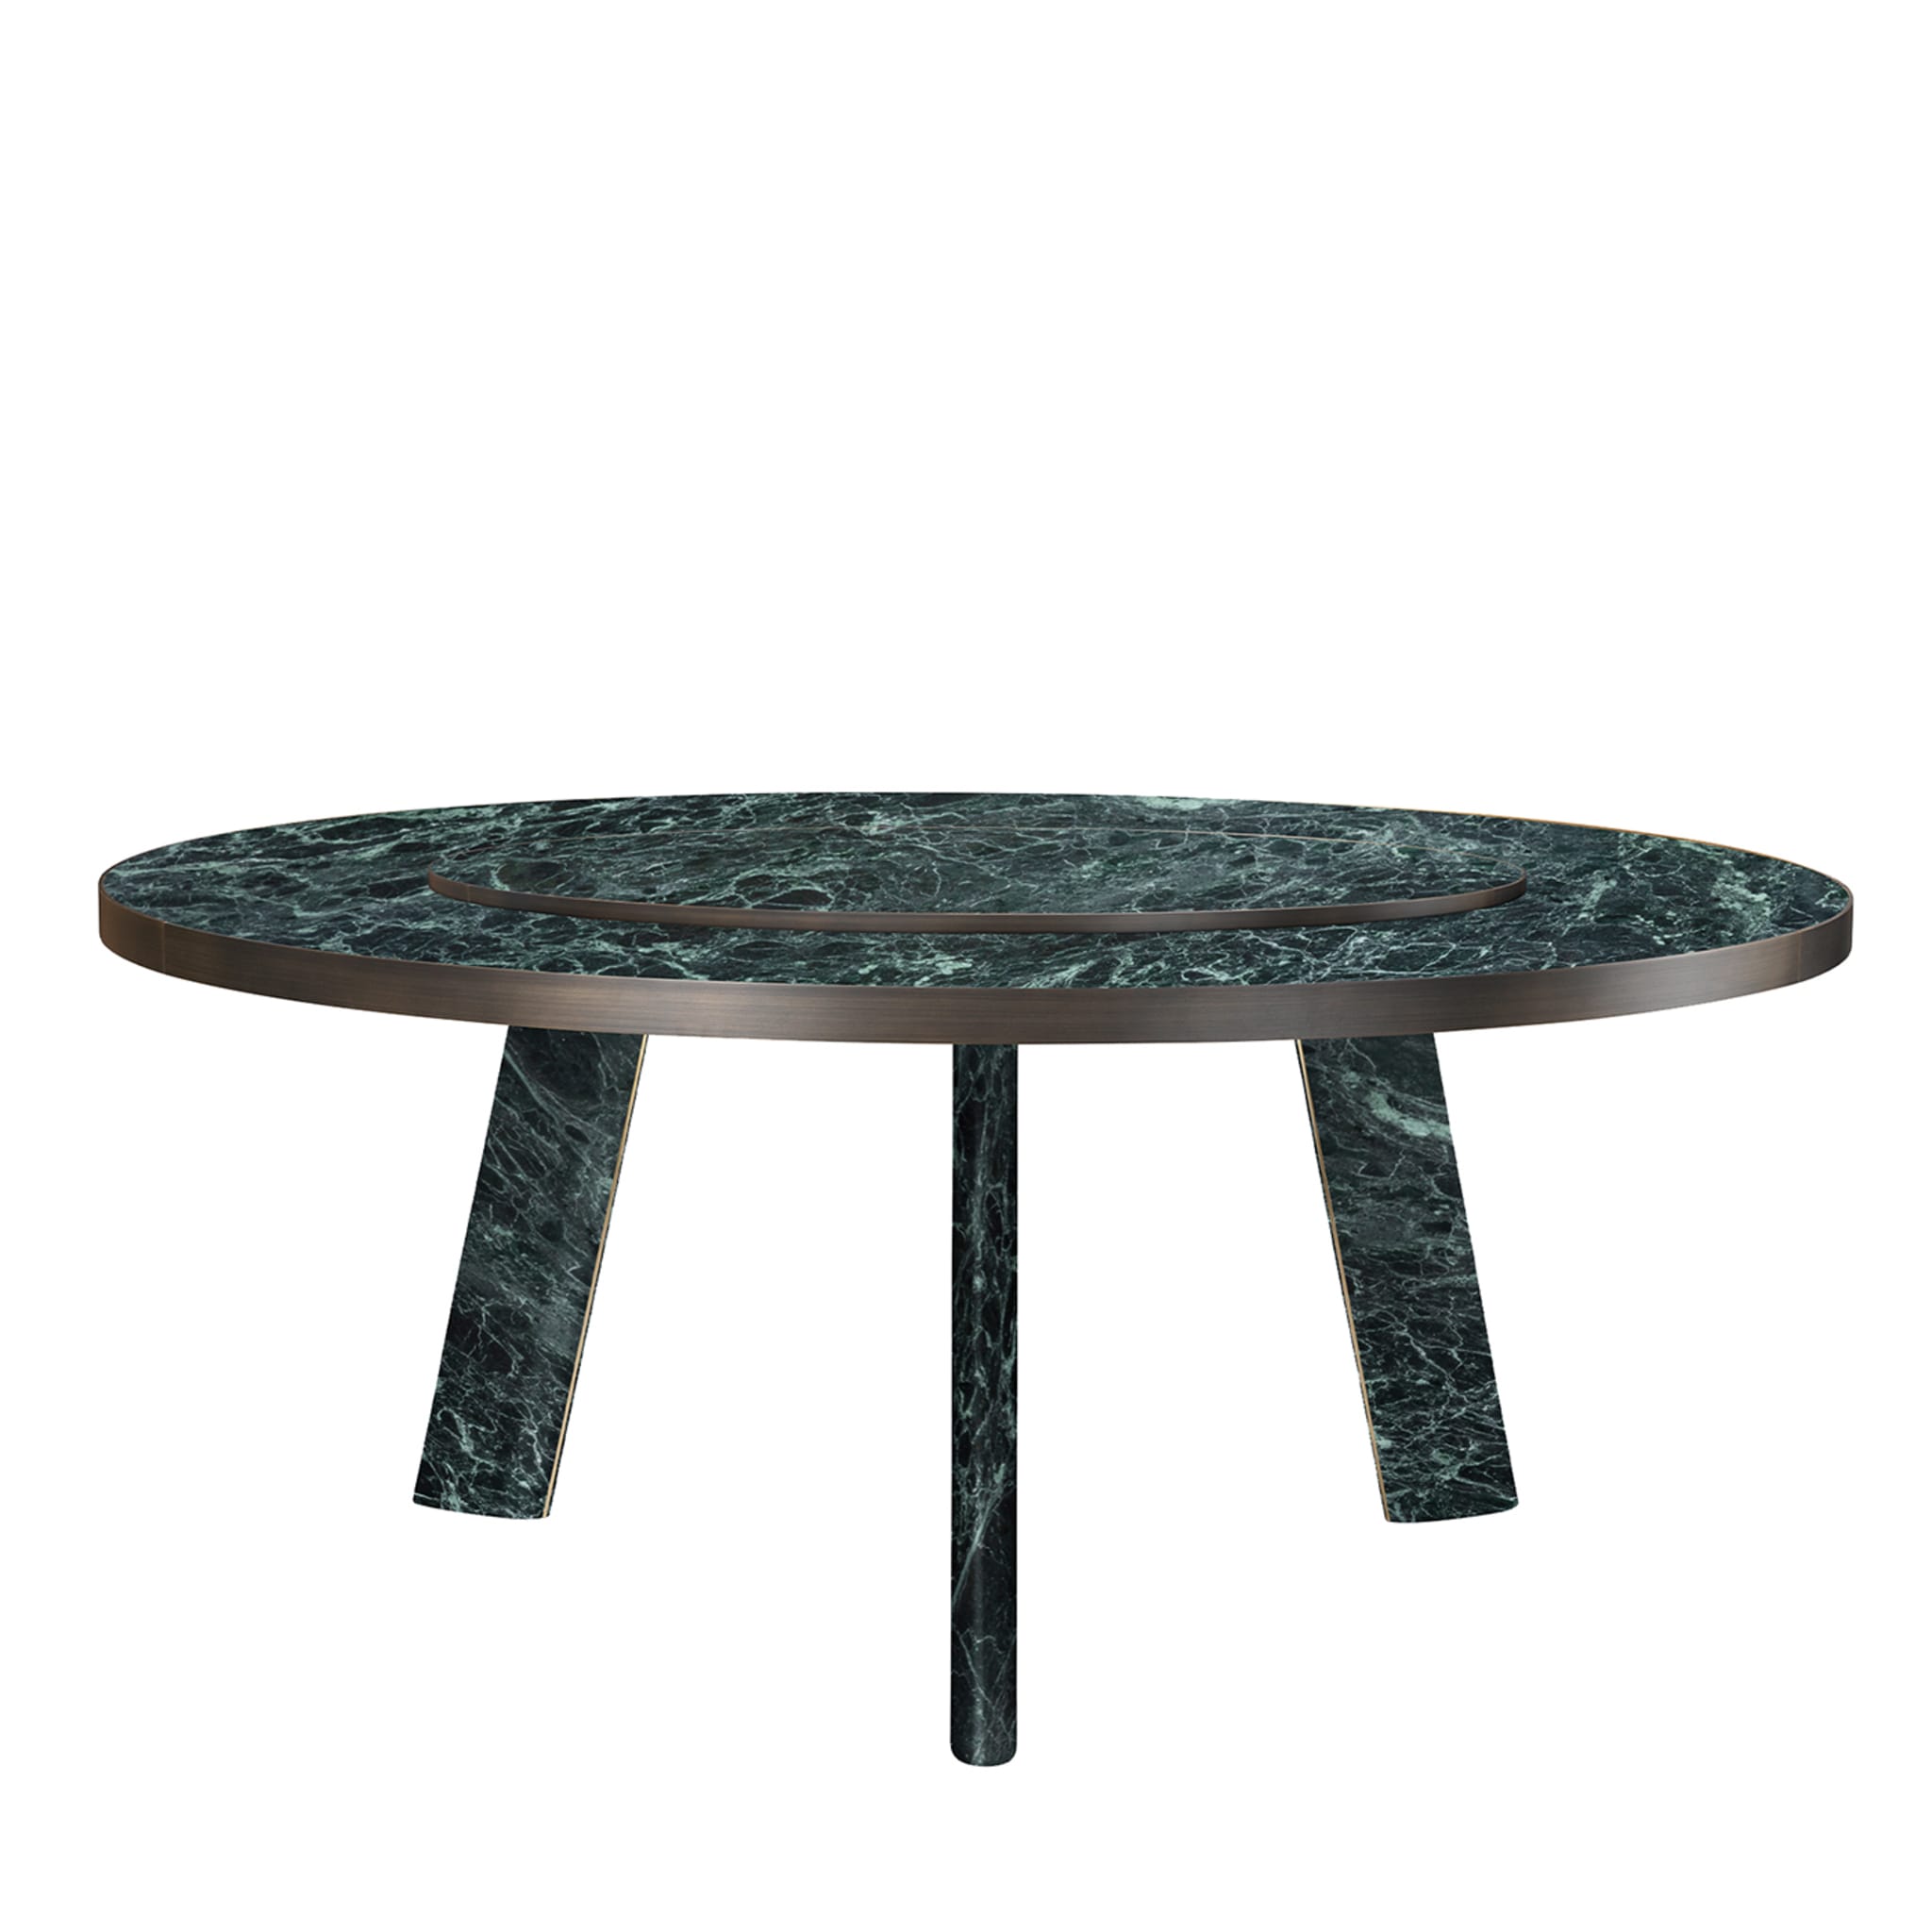 Native Verde Alpi Round Dining Table by Stefano Giovannoni - Main view